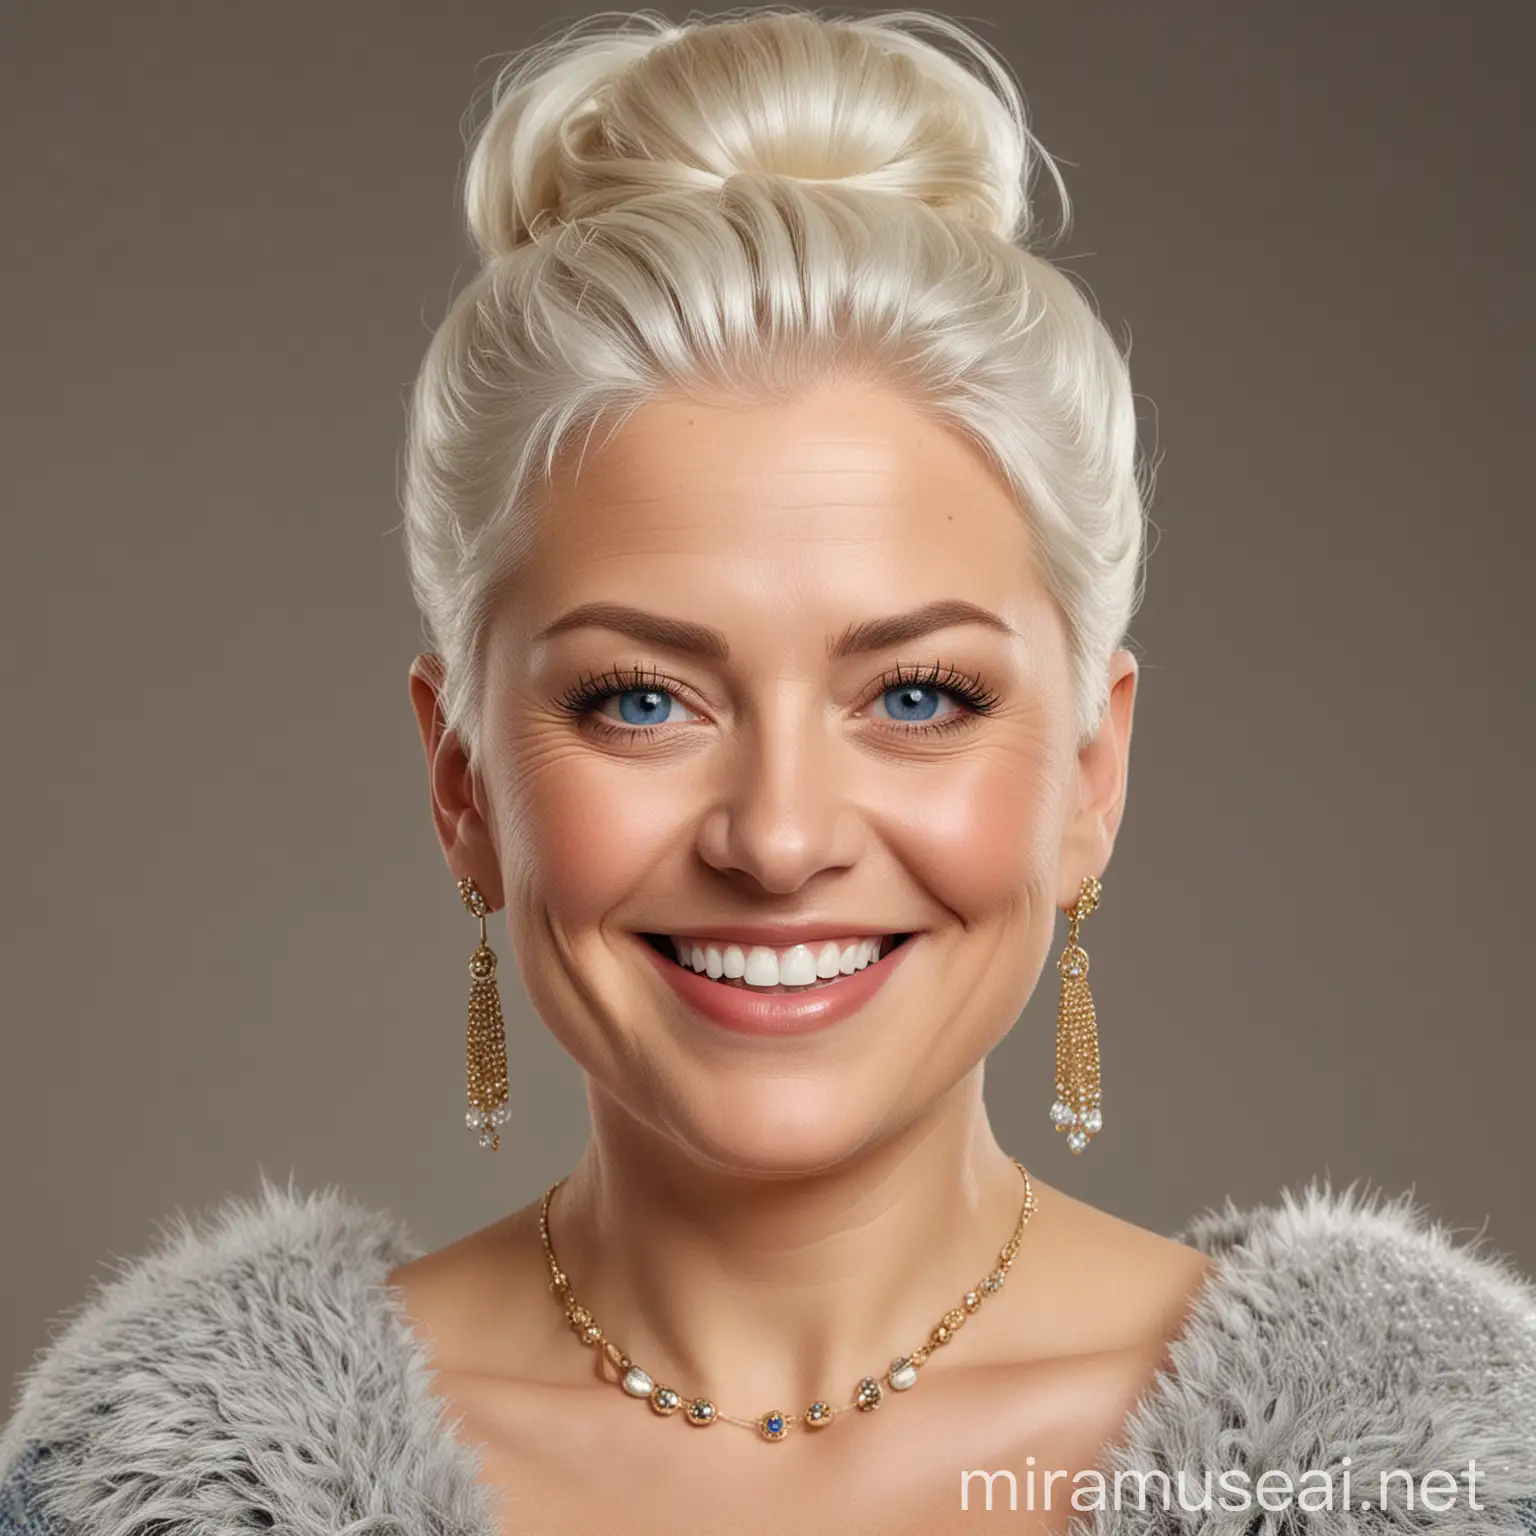 Elegant Mature Woman with White Hair and Gold Jewelry Smiling